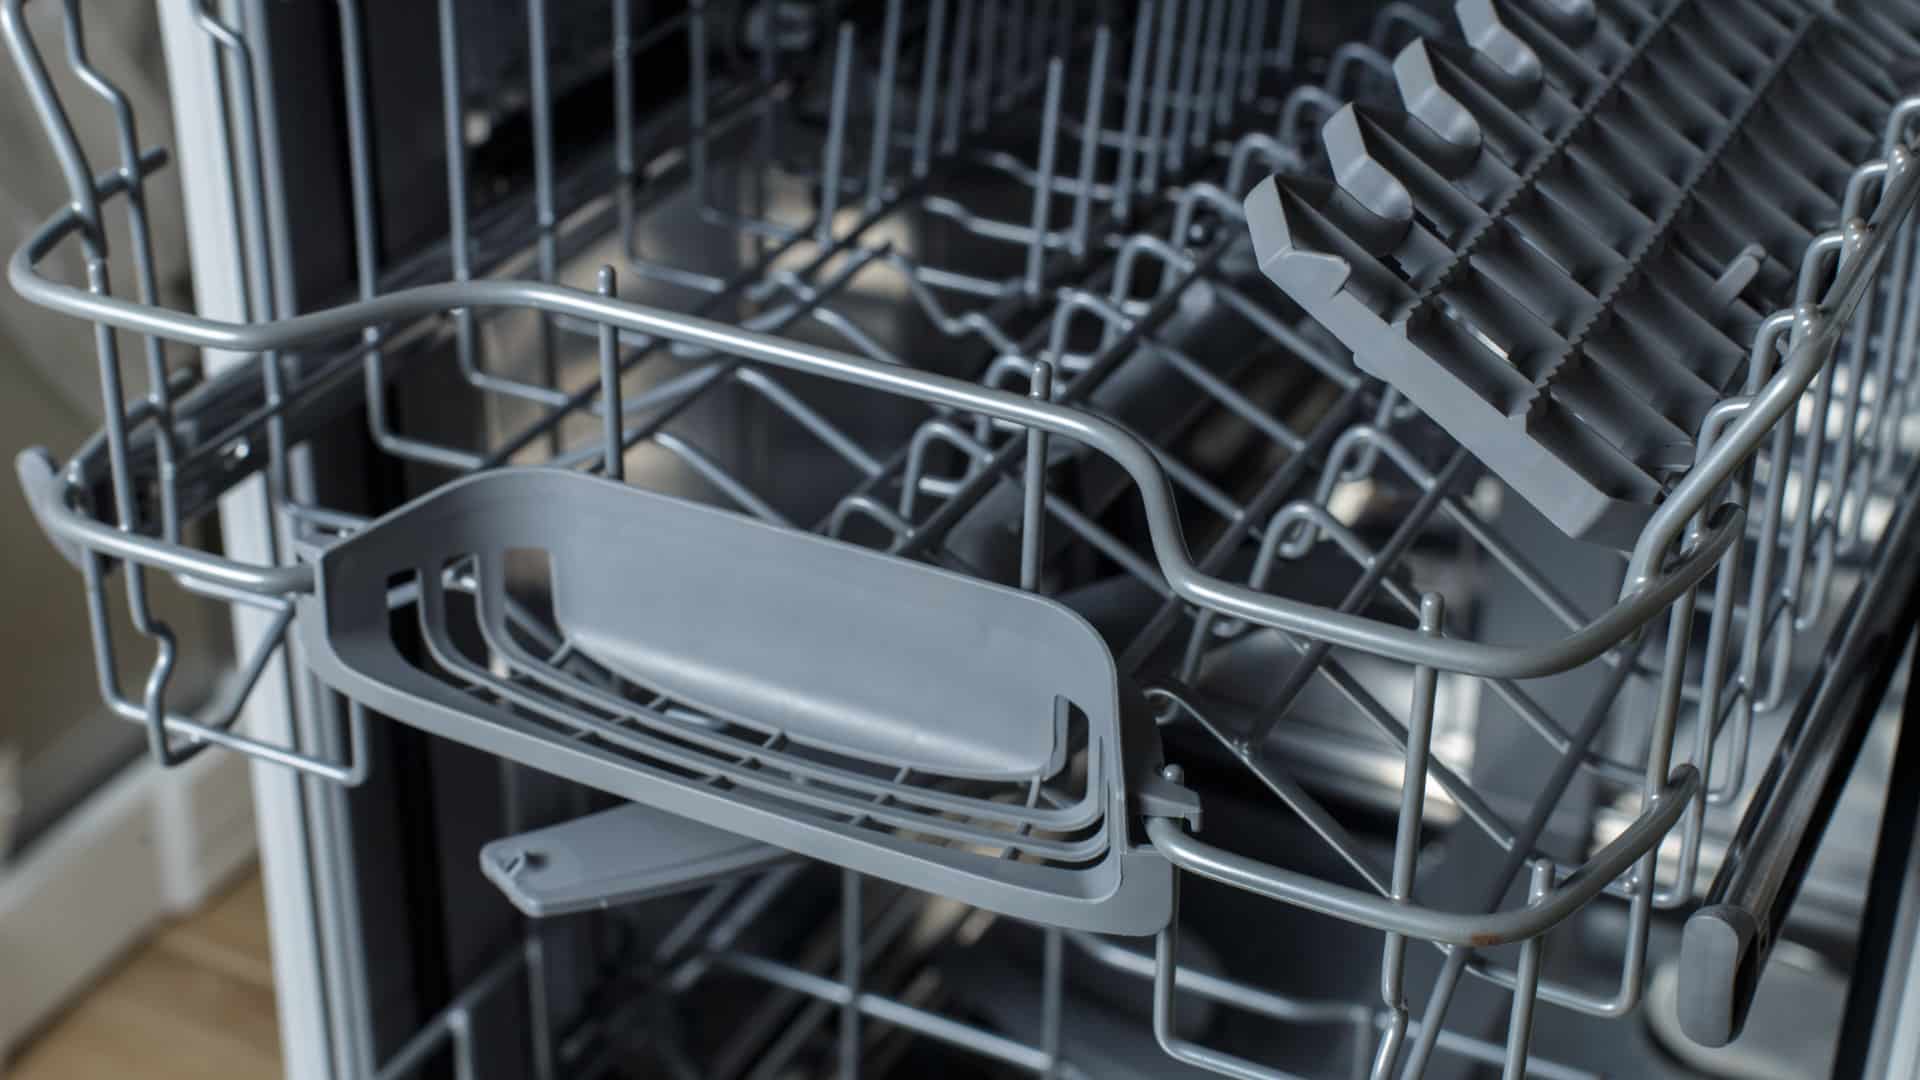 Featured image for “5 Signs Your Dishwasher Needs To Be Repaired”